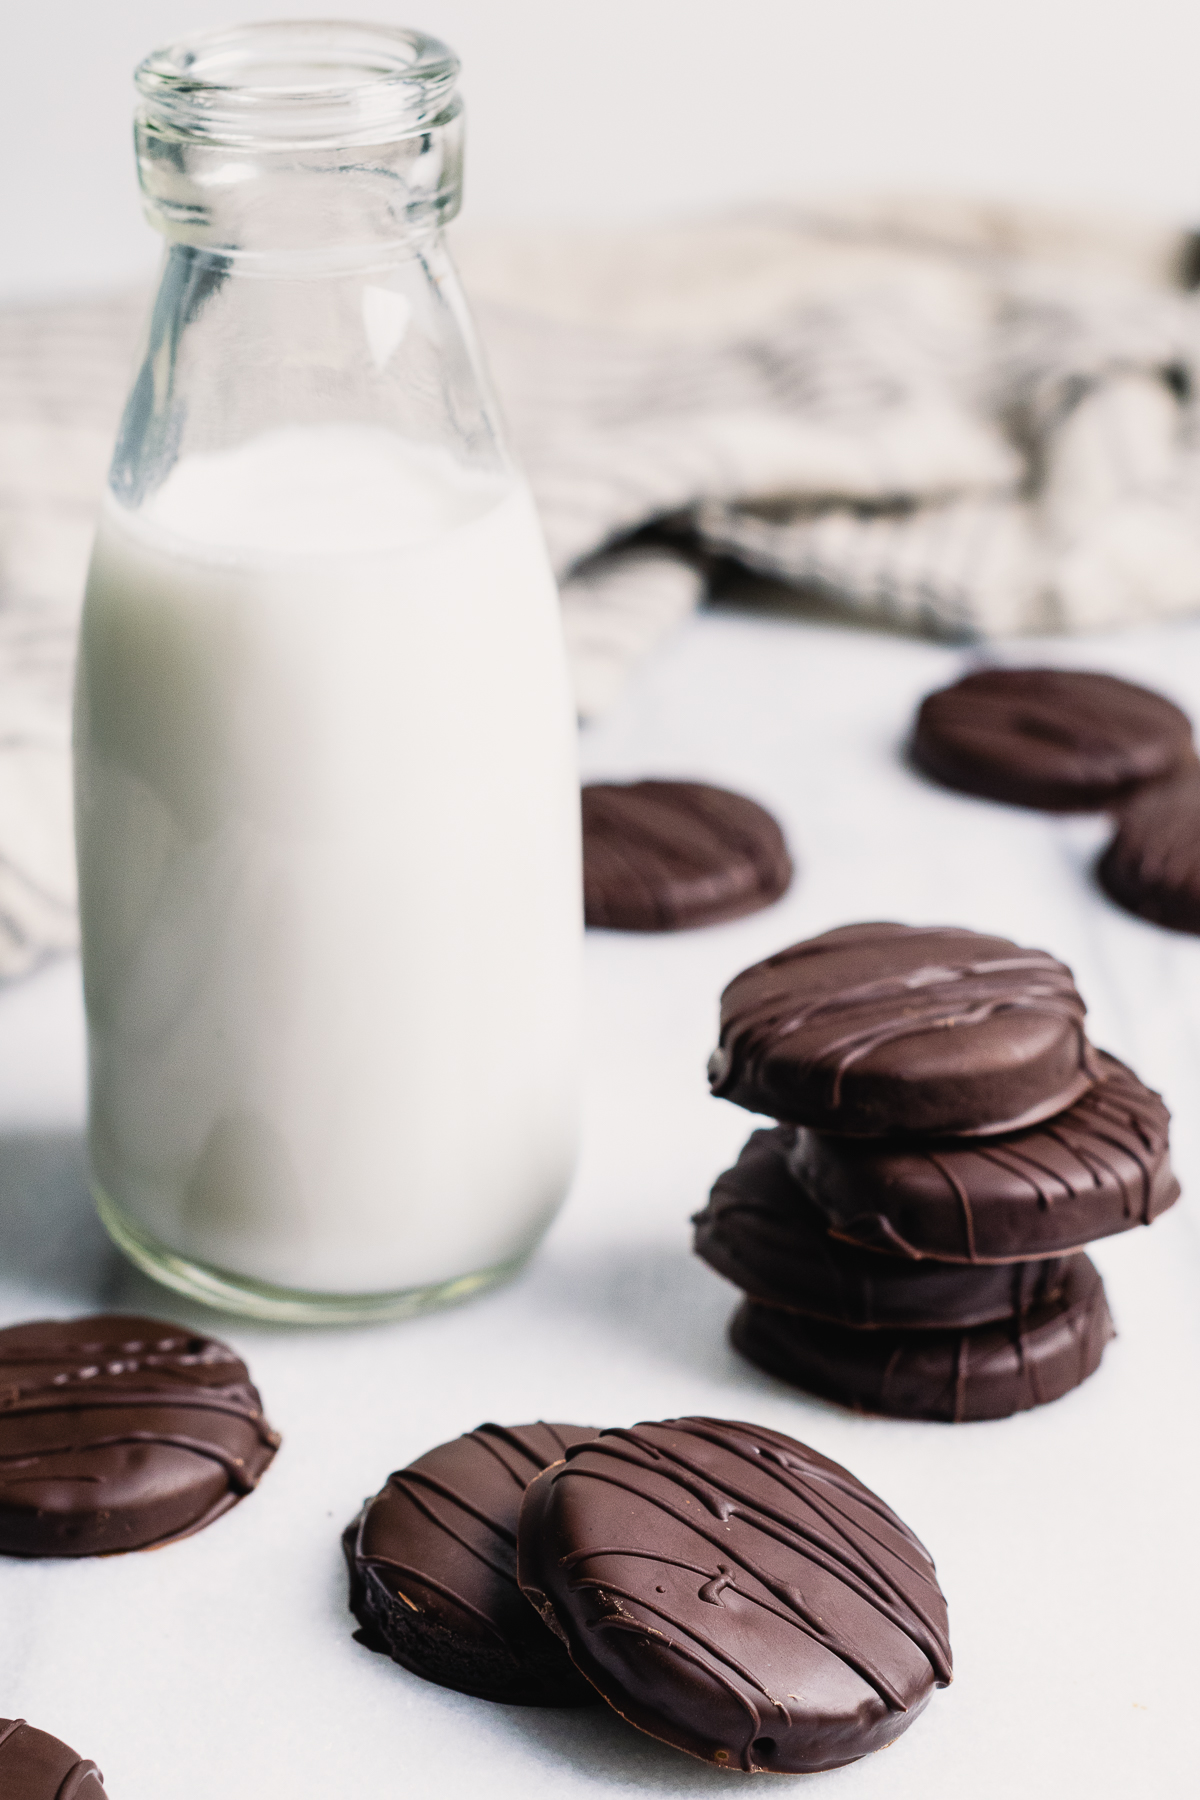 Gluten free thin mints scattered on a white table.